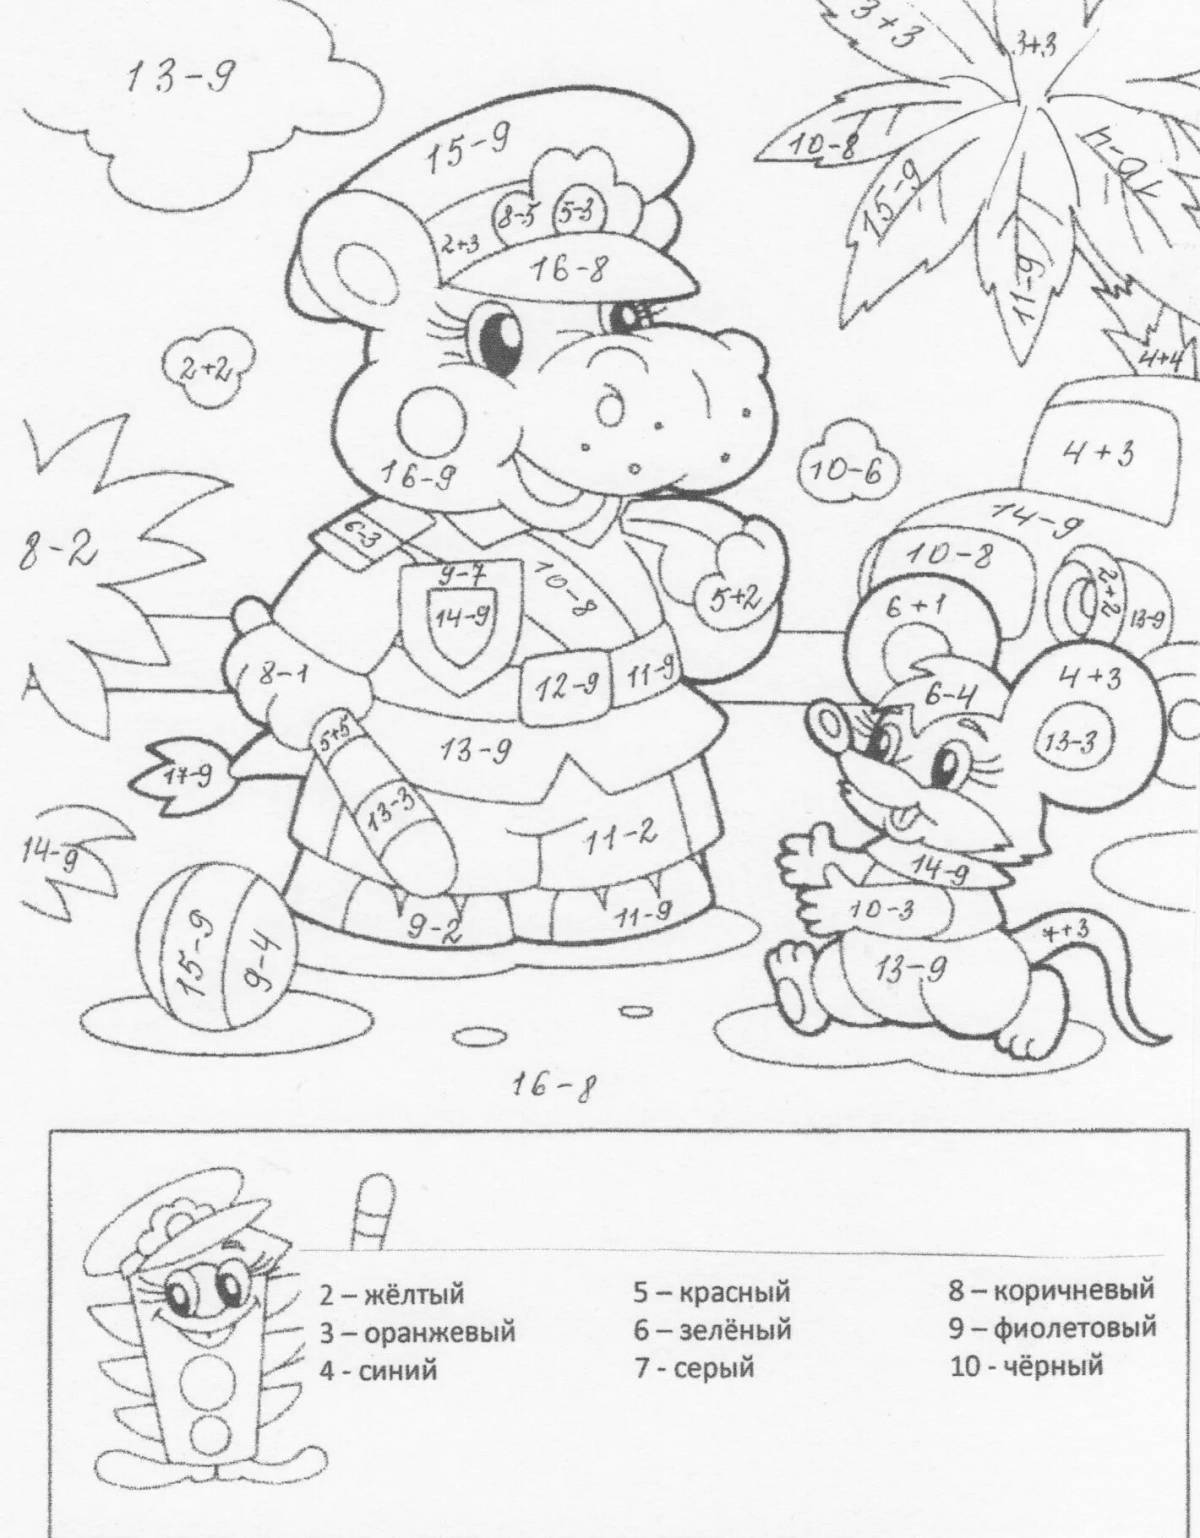 Creative addition and subtraction coloring page